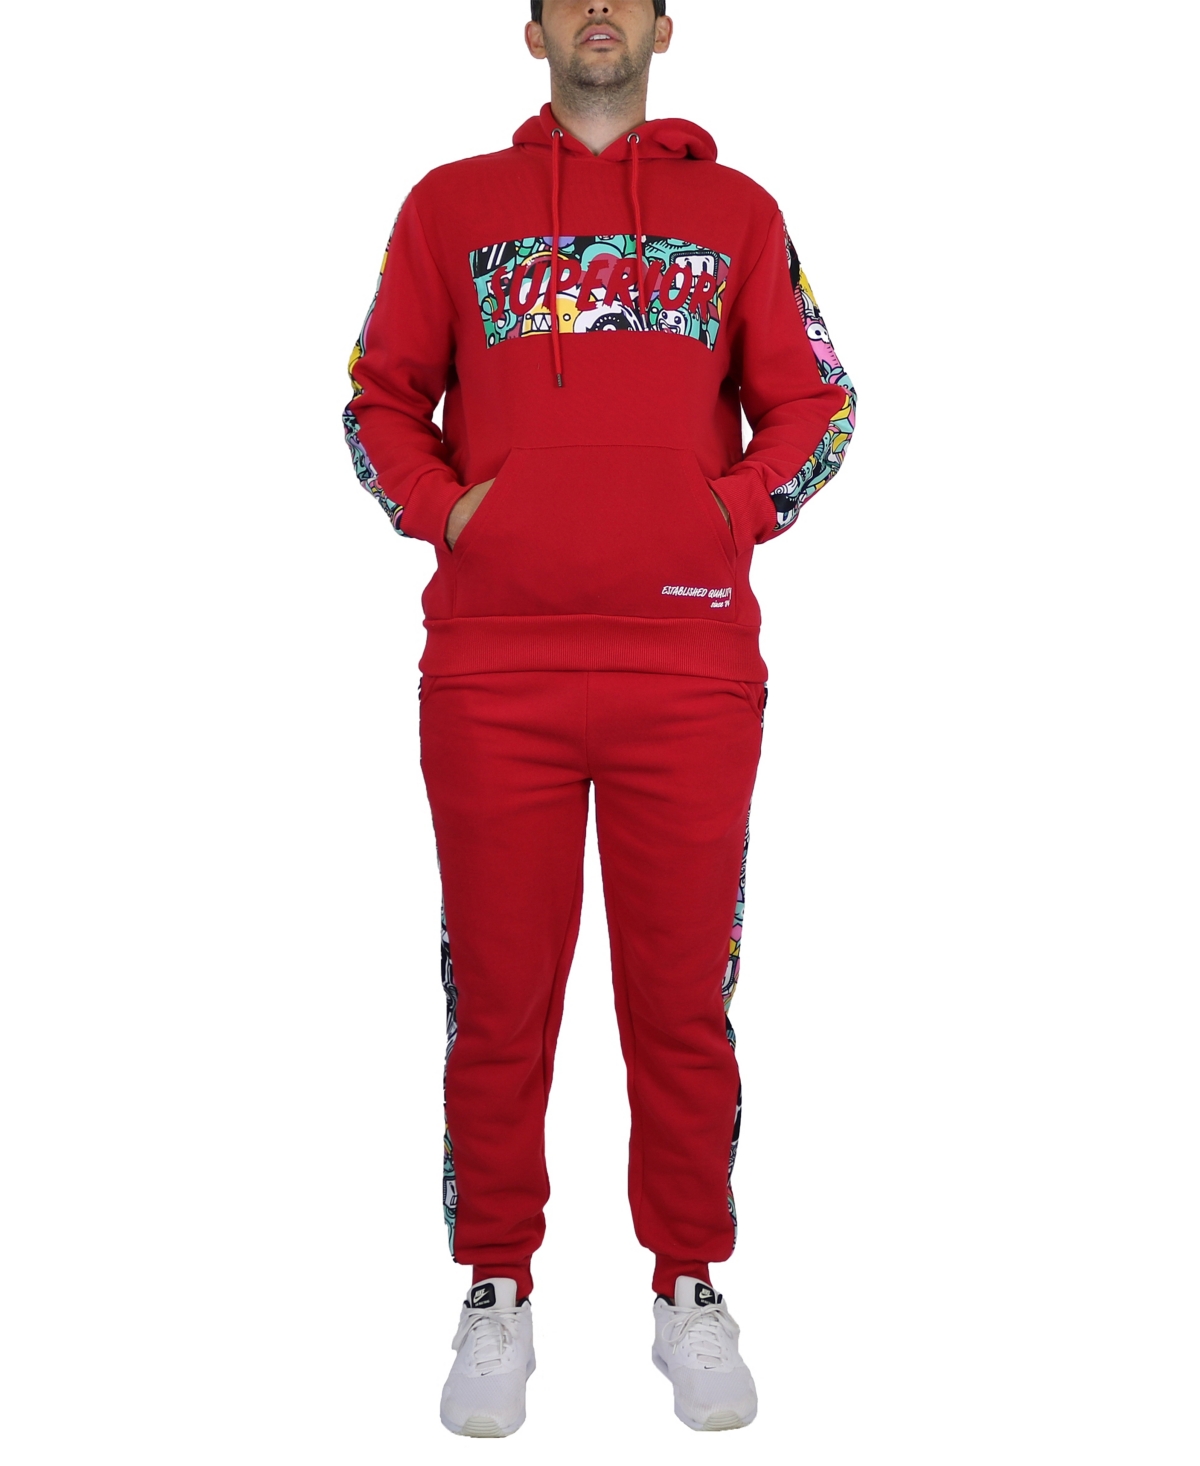 Galaxy By Harvic Men's Fleece-lined Pullover Hoodie And Jogger Sweatpants, 2 Piece Set In Red